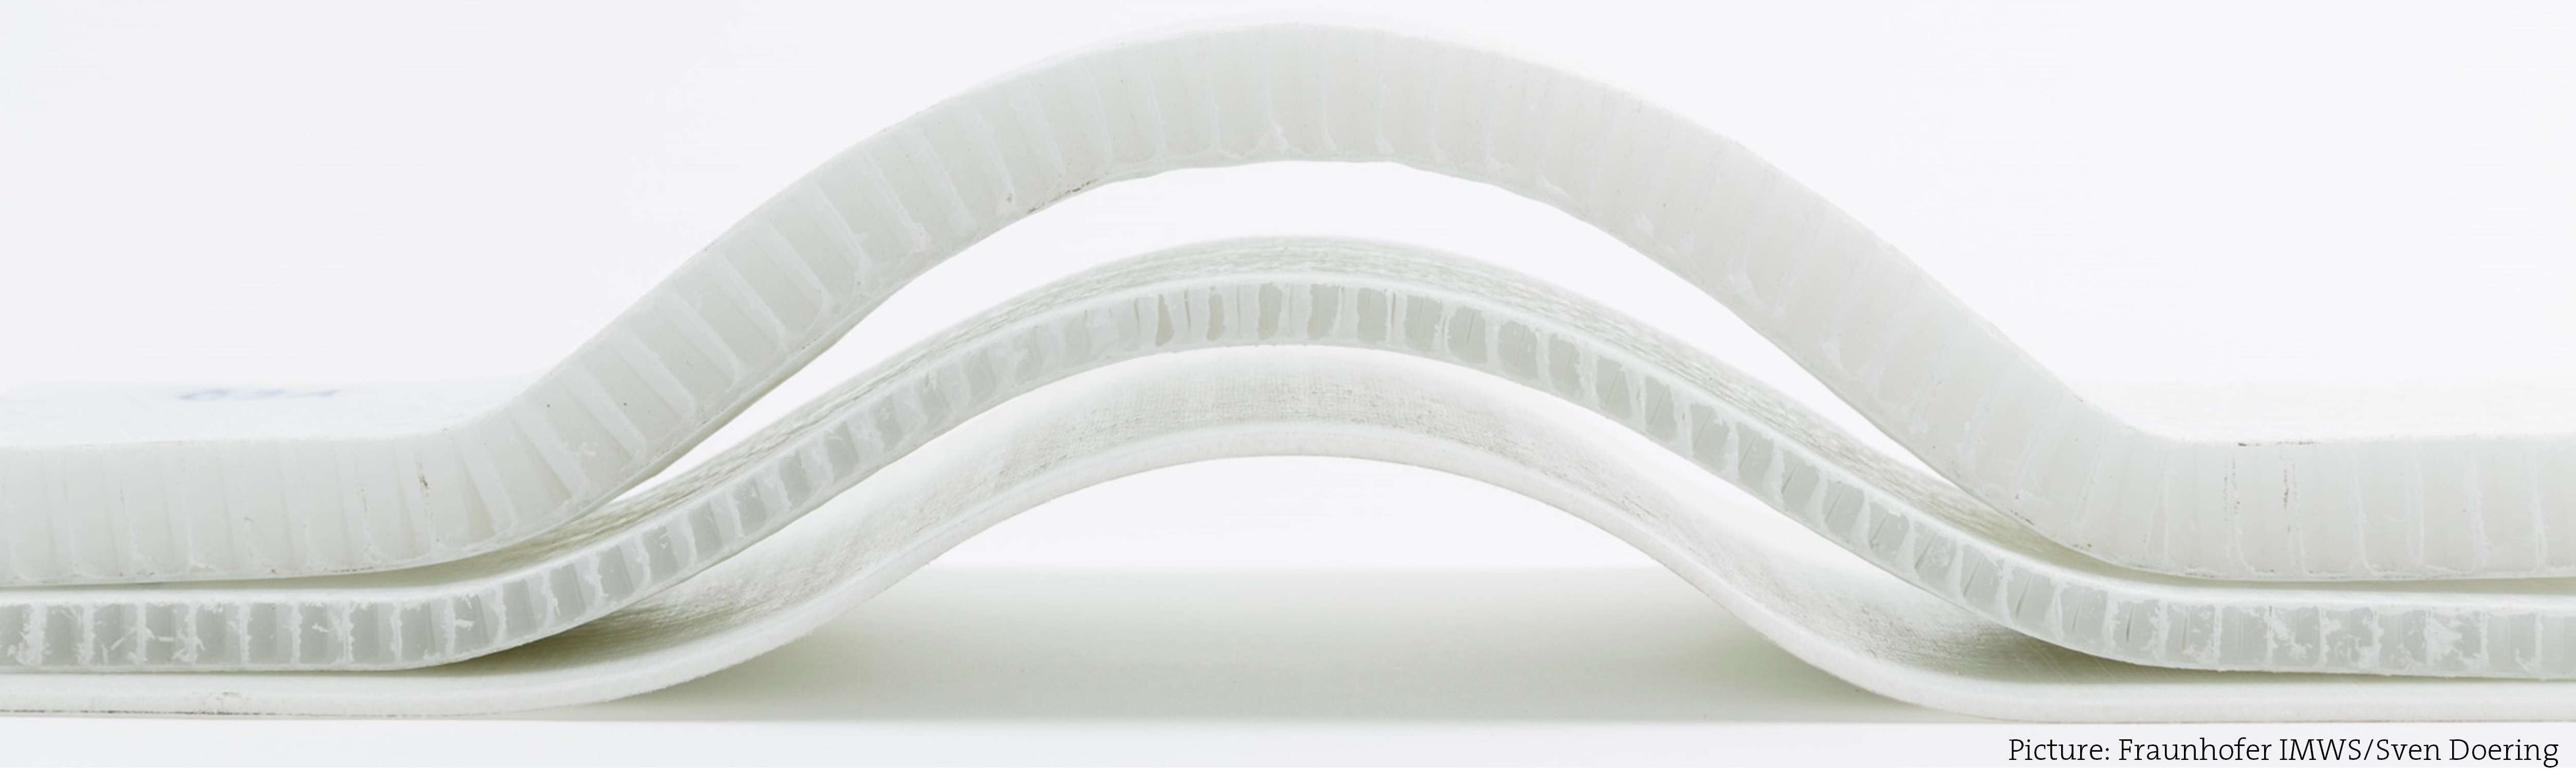 Organosandwich consists of two very thin face sheets of thermoplastic fiber composites separated by a thermoplastic honeycomb core.